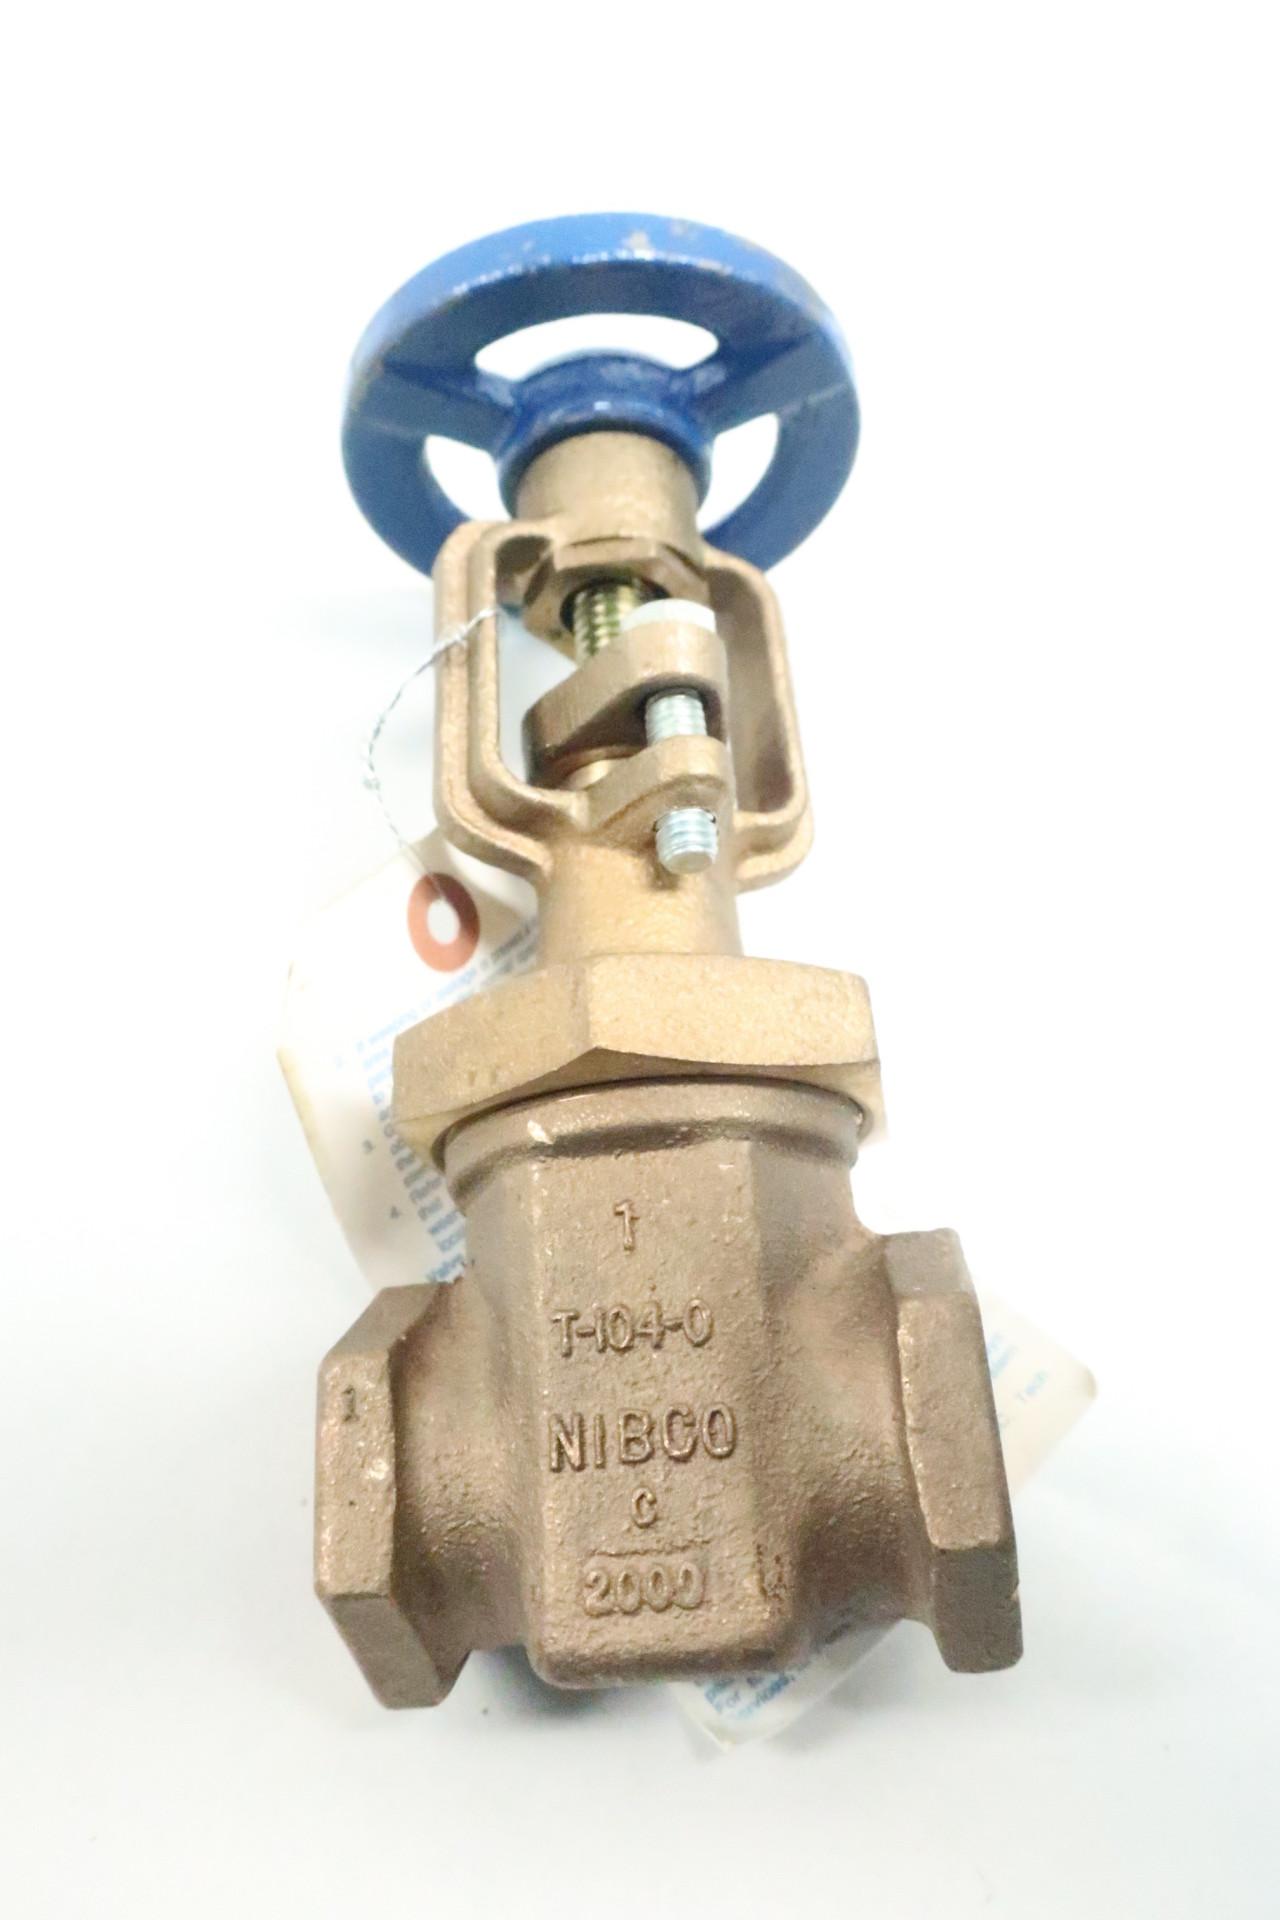 Details about   Nibco T-104-0 Manual Bronze Threaded 1in Npt Wedge Gate Valve 